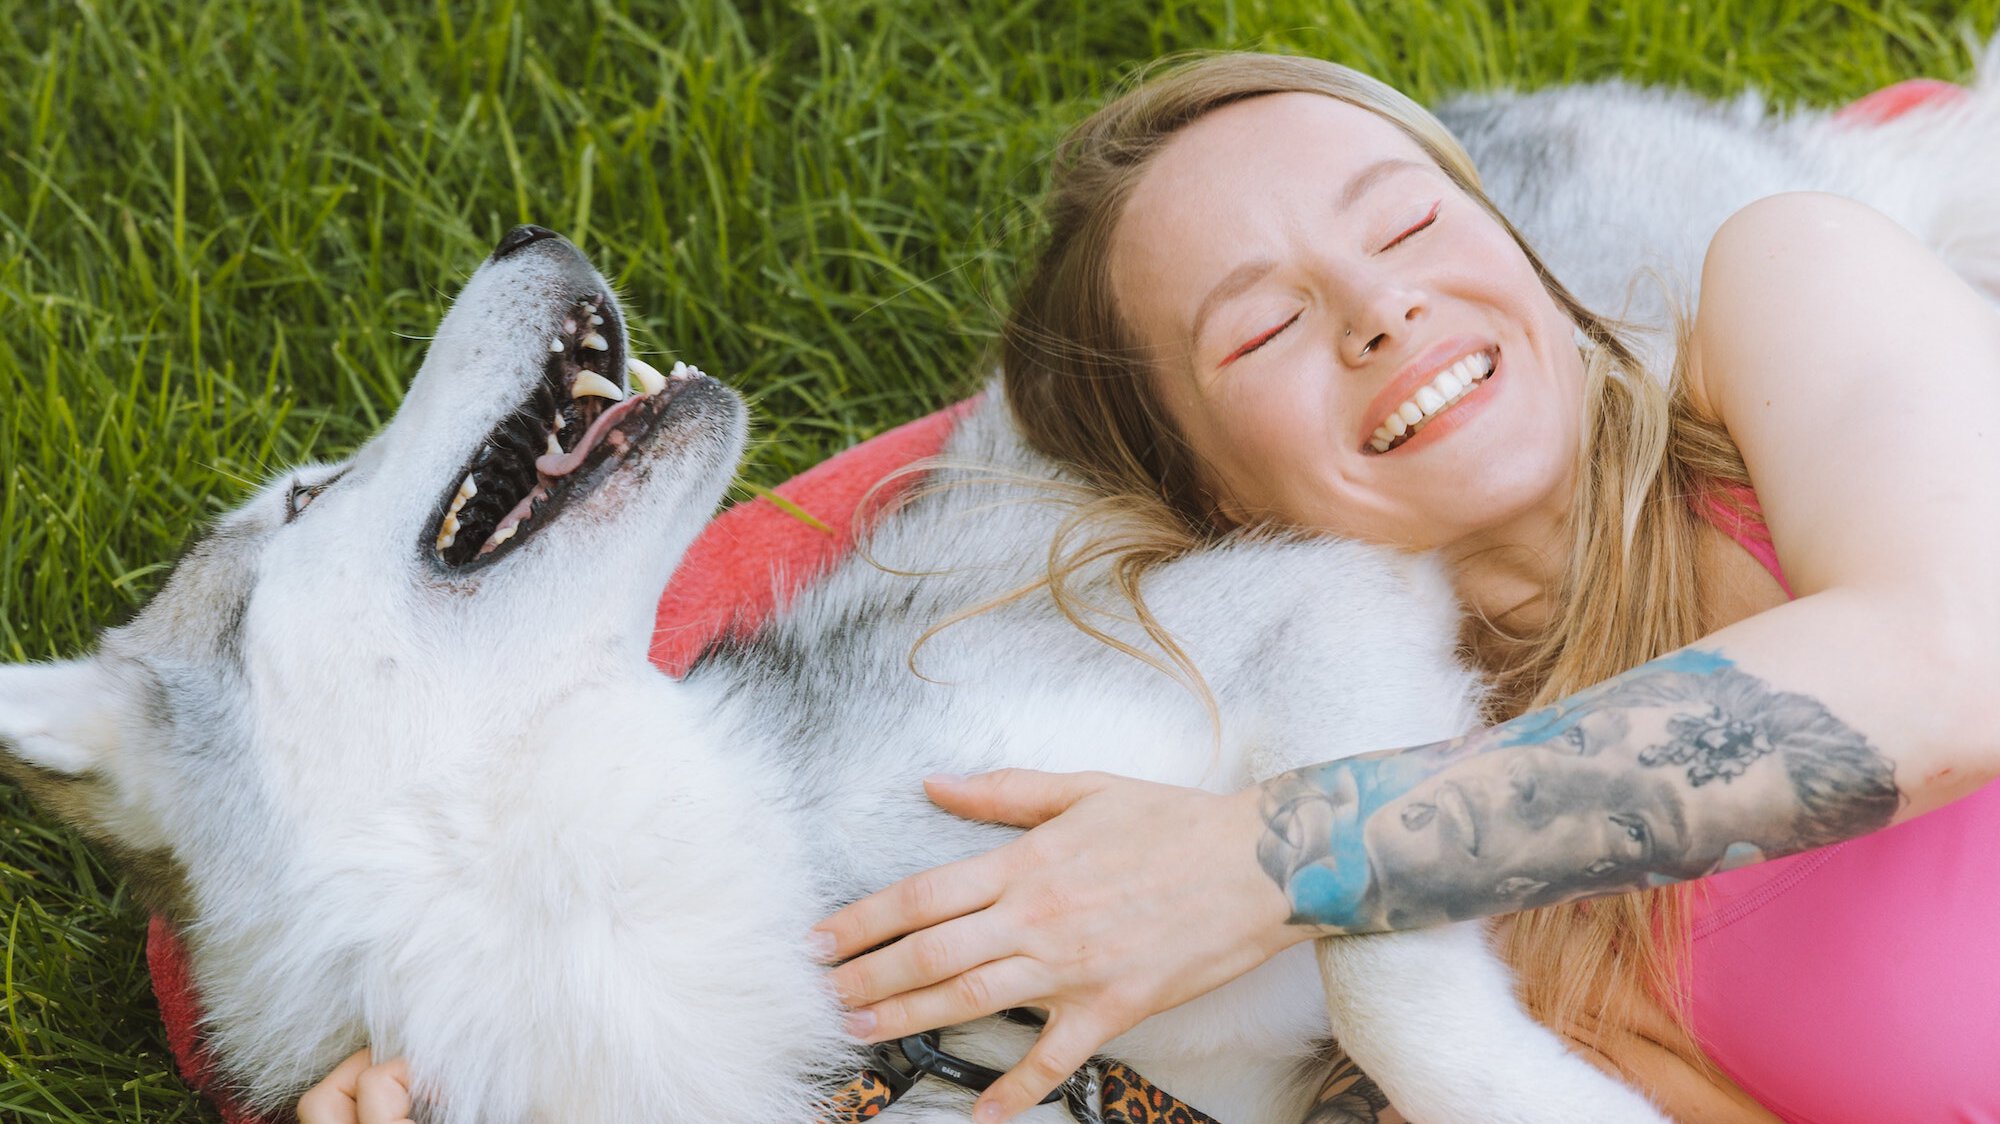 Owner & her dog happily laying in the grass together